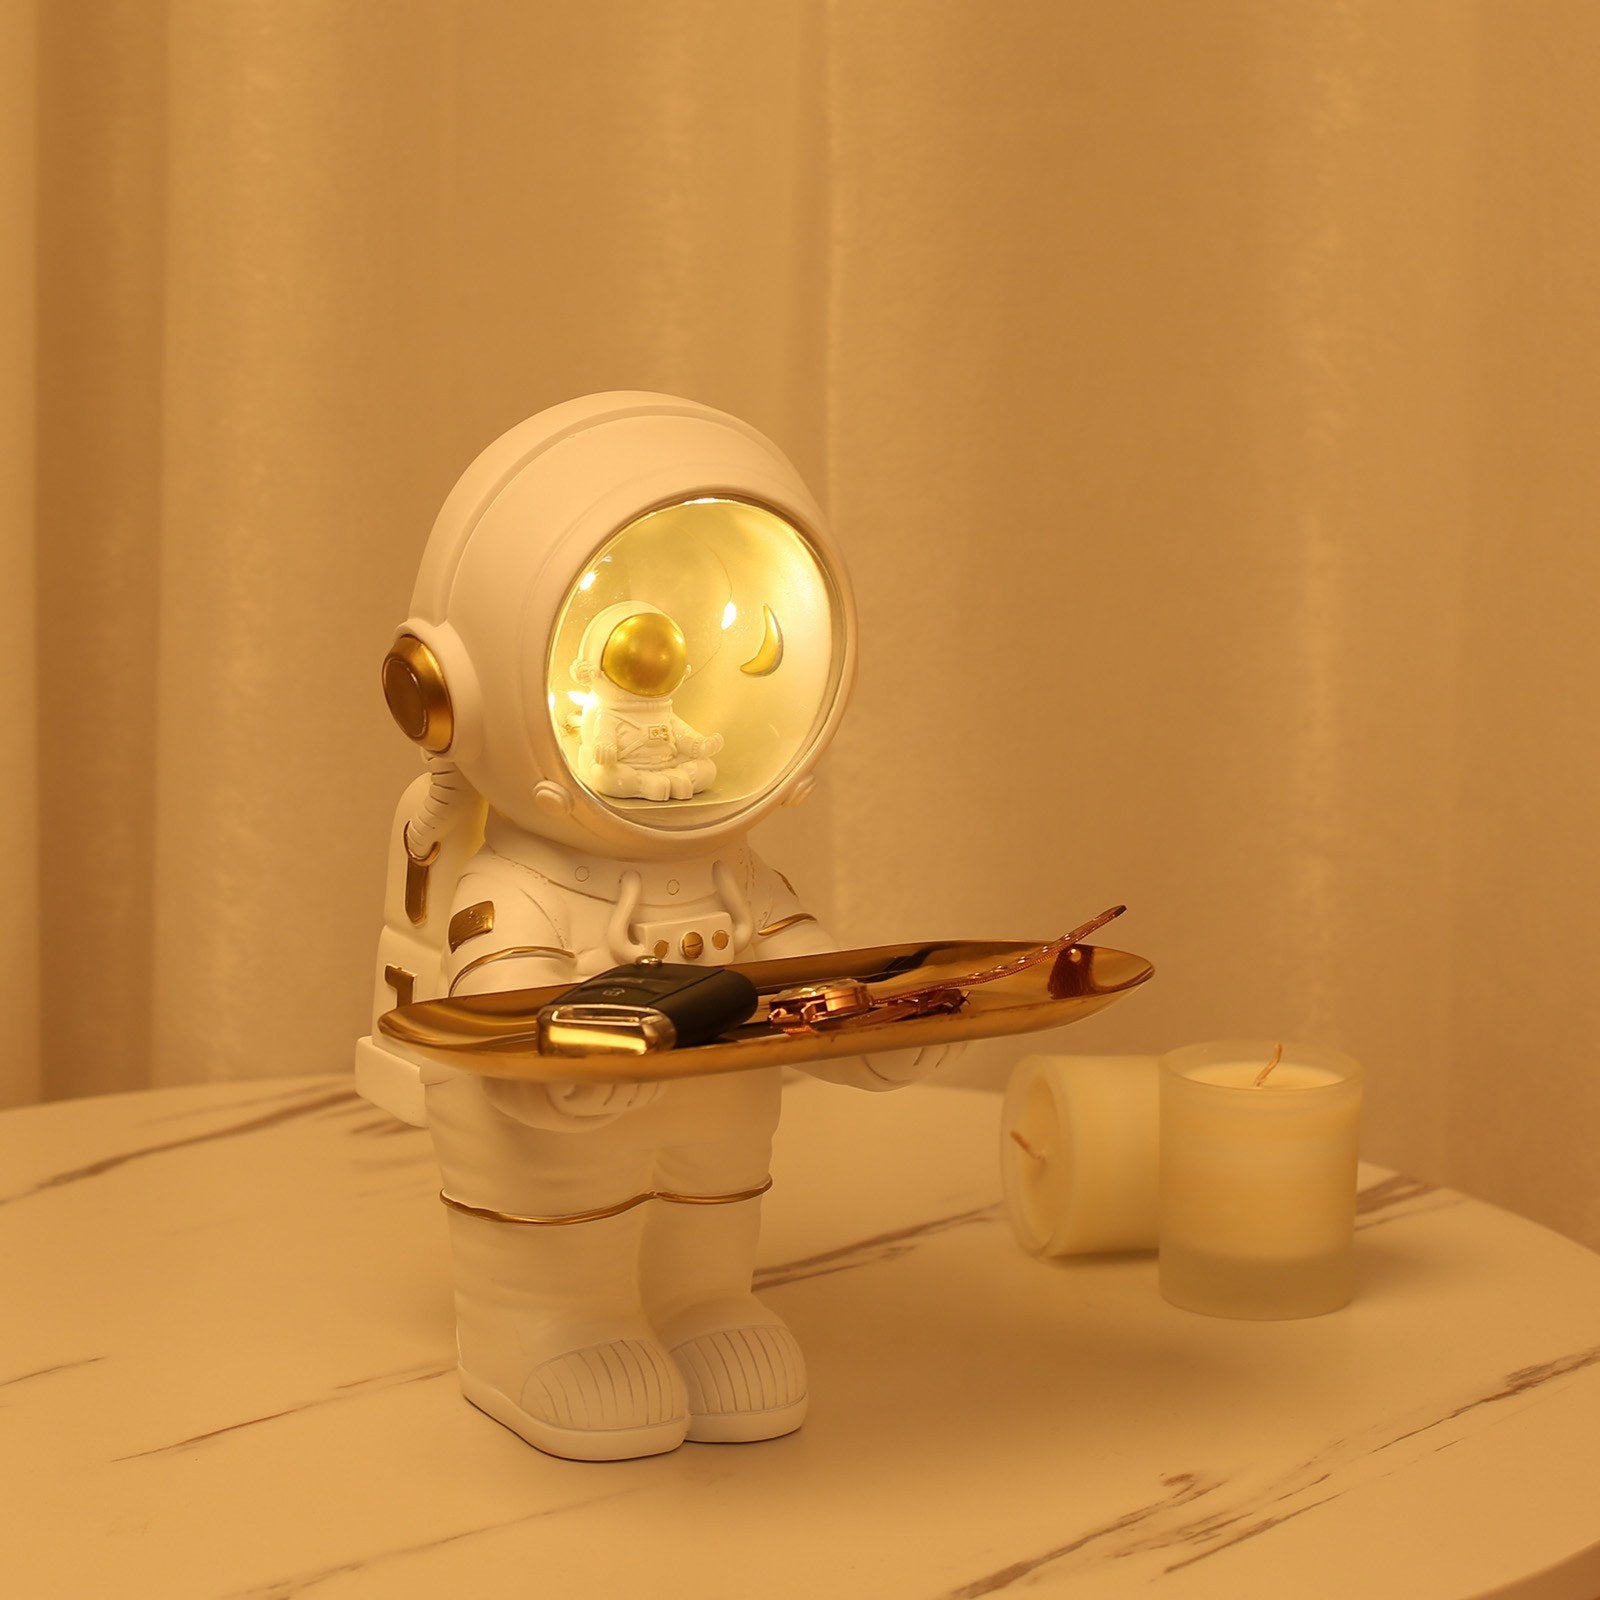 The Astronaut Figurine is the perfect gift for any astronaut or space geek who has ever dreamed to explore the universe.